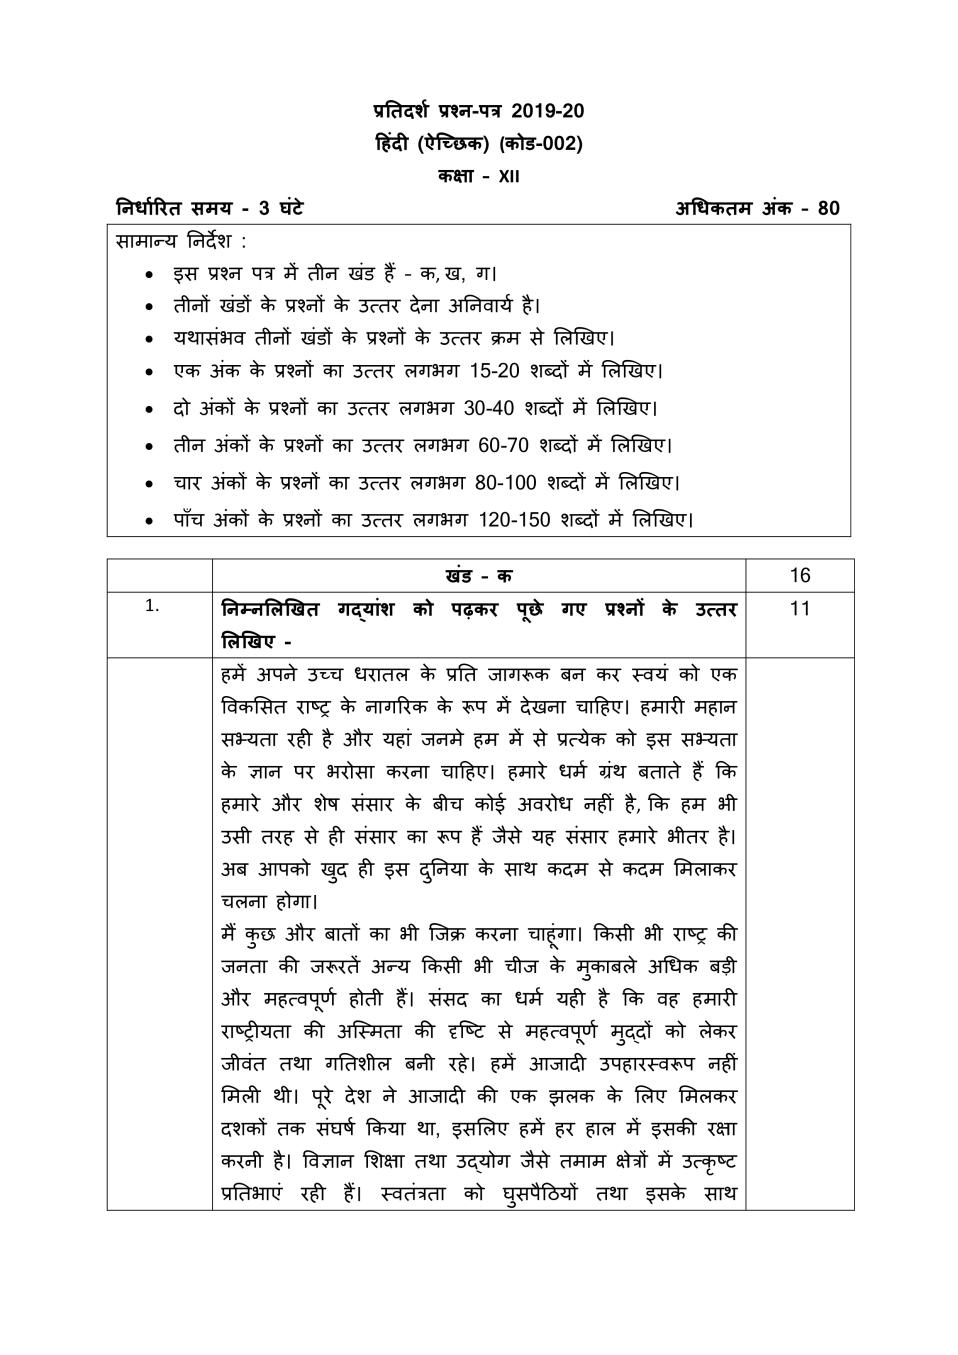 CBSE Class 12 Sample Paper 2020 for Hindi Elective - Page 1